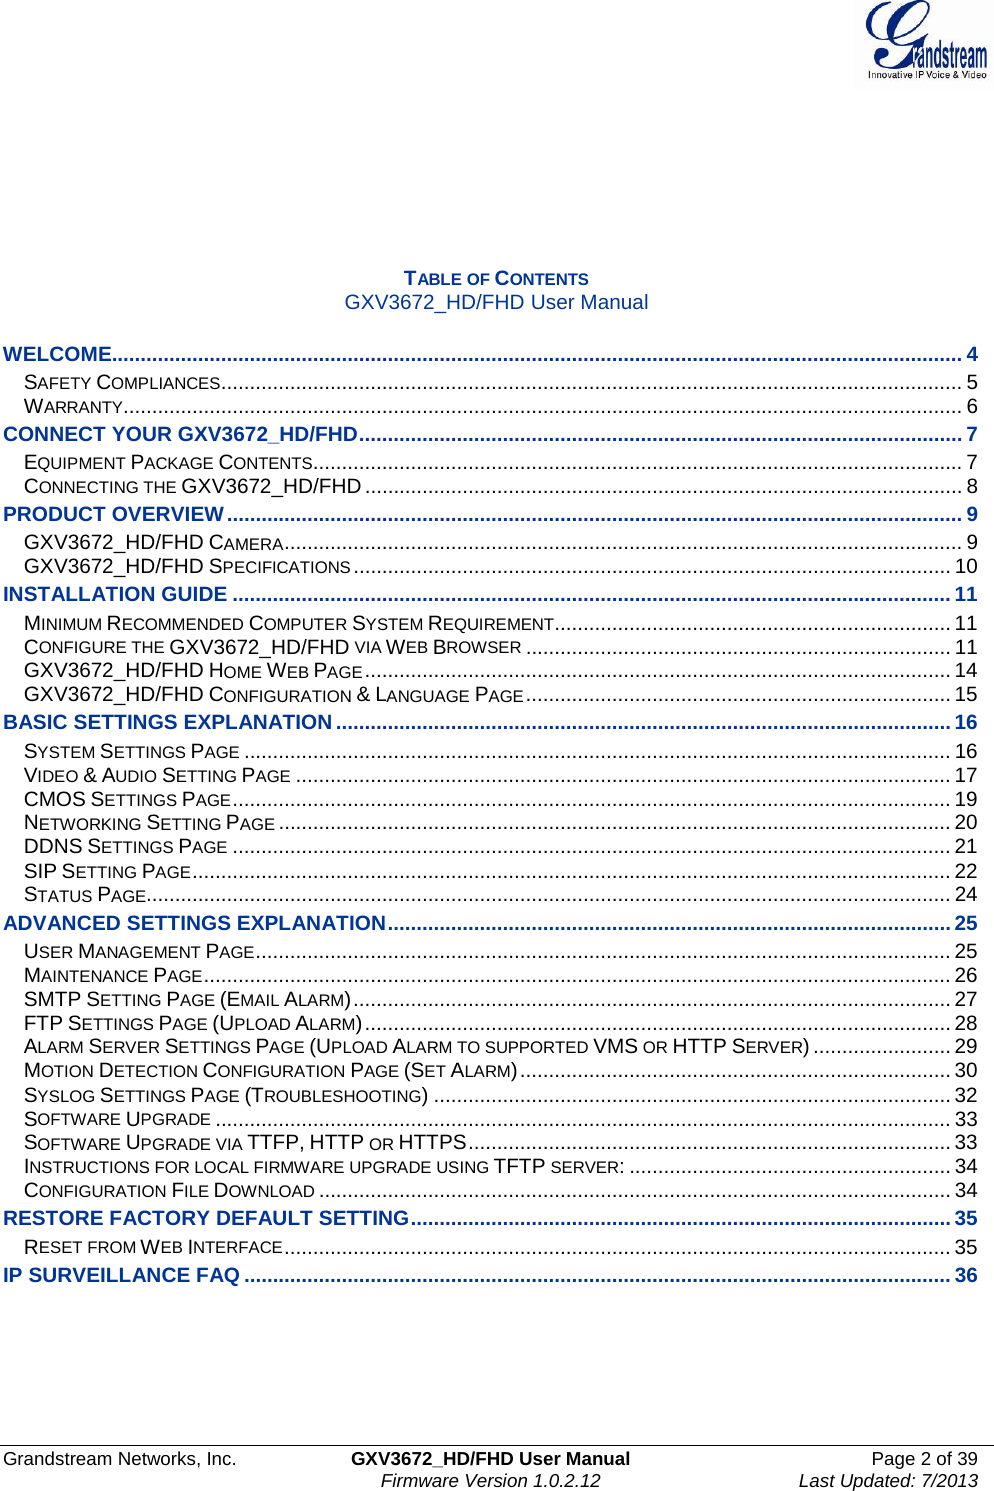  Grandstream Networks, Inc. GXV3672_HD/FHD User Manual Page 2 of 39   Firmware Version 1.0.2.12 Last Updated: 7/2013        TABLE OF CONTENTS GXV3672_HD/FHD User Manual  WELCOME.................................................................................................................................................... 4 SAFETY COMPLIANCES ................................................................................................................................. 5 WARRANTY .................................................................................................................................................. 6 CONNECT YOUR GXV3672_HD/FHD ......................................................................................................... 7 EQUIPMENT PACKAGE CONTENTS ................................................................................................................. 7 CONNECTING THE GXV3672_HD/FHD ........................................................................................................ 8 PRODUCT OVERVIEW ................................................................................................................................ 9 GXV3672_HD/FHD CAMERA ...................................................................................................................... 9 GXV3672_HD/FHD SPECIFICATIONS ........................................................................................................ 10 INSTALLATION GUIDE ............................................................................................................................. 11 MINIMUM RECOMMENDED COMPUTER SYSTEM REQUIREMENT ..................................................................... 11 CONFIGURE THE GXV3672_HD/FHD VIA WEB BROWSER .......................................................................... 11 GXV3672_HD/FHD HOME WEB PAGE ...................................................................................................... 14 GXV3672_HD/FHD CONFIGURATION &amp; LANGUAGE PAGE .......................................................................... 15 BASIC SETTINGS EXPLANATION ........................................................................................................... 16 SYSTEM SETTINGS PAGE ........................................................................................................................... 16 VIDEO &amp; AUDIO SETTING PAGE .................................................................................................................. 17 CMOS SETTINGS PAGE ............................................................................................................................. 19 NETWORKING SETTING PAGE ..................................................................................................................... 20 DDNS SETTINGS PAGE ............................................................................................................................. 21 SIP SETTING PAGE .................................................................................................................................... 22 STATUS PAGE ............................................................................................................................................ 24 ADVANCED SETTINGS EXPLANATION .................................................................................................. 25 USER MANAGEMENT PAGE ......................................................................................................................... 25 MAINTENANCE PAGE .................................................................................................................................. 26 SMTP SETTING PAGE (EMAIL ALARM) ........................................................................................................ 27 FTP SETTINGS PAGE (UPLOAD ALARM) ...................................................................................................... 28 ALARM SERVER SETTINGS PAGE (UPLOAD ALARM TO SUPPORTED VMS OR HTTP SERVER) ........................ 29 MOTION DETECTION CONFIGURATION PAGE (SET ALARM) ........................................................................... 30 SYSLOG SETTINGS PAGE (TROUBLESHOOTING) .......................................................................................... 32 SOFTWARE UPGRADE ................................................................................................................................ 33 SOFTWARE UPGRADE VIA TTFP, HTTP OR HTTPS .................................................................................... 33 INSTRUCTIONS FOR LOCAL FIRMWARE UPGRADE USING TFTP SERVER: ........................................................ 34 CONFIGURATION FILE DOWNLOAD .............................................................................................................. 34 RESTORE FACTORY DEFAULT SETTING .............................................................................................. 35 RESET FROM WEB INTERFACE .................................................................................................................... 35 IP SURVEILLANCE FAQ ........................................................................................................................... 36       